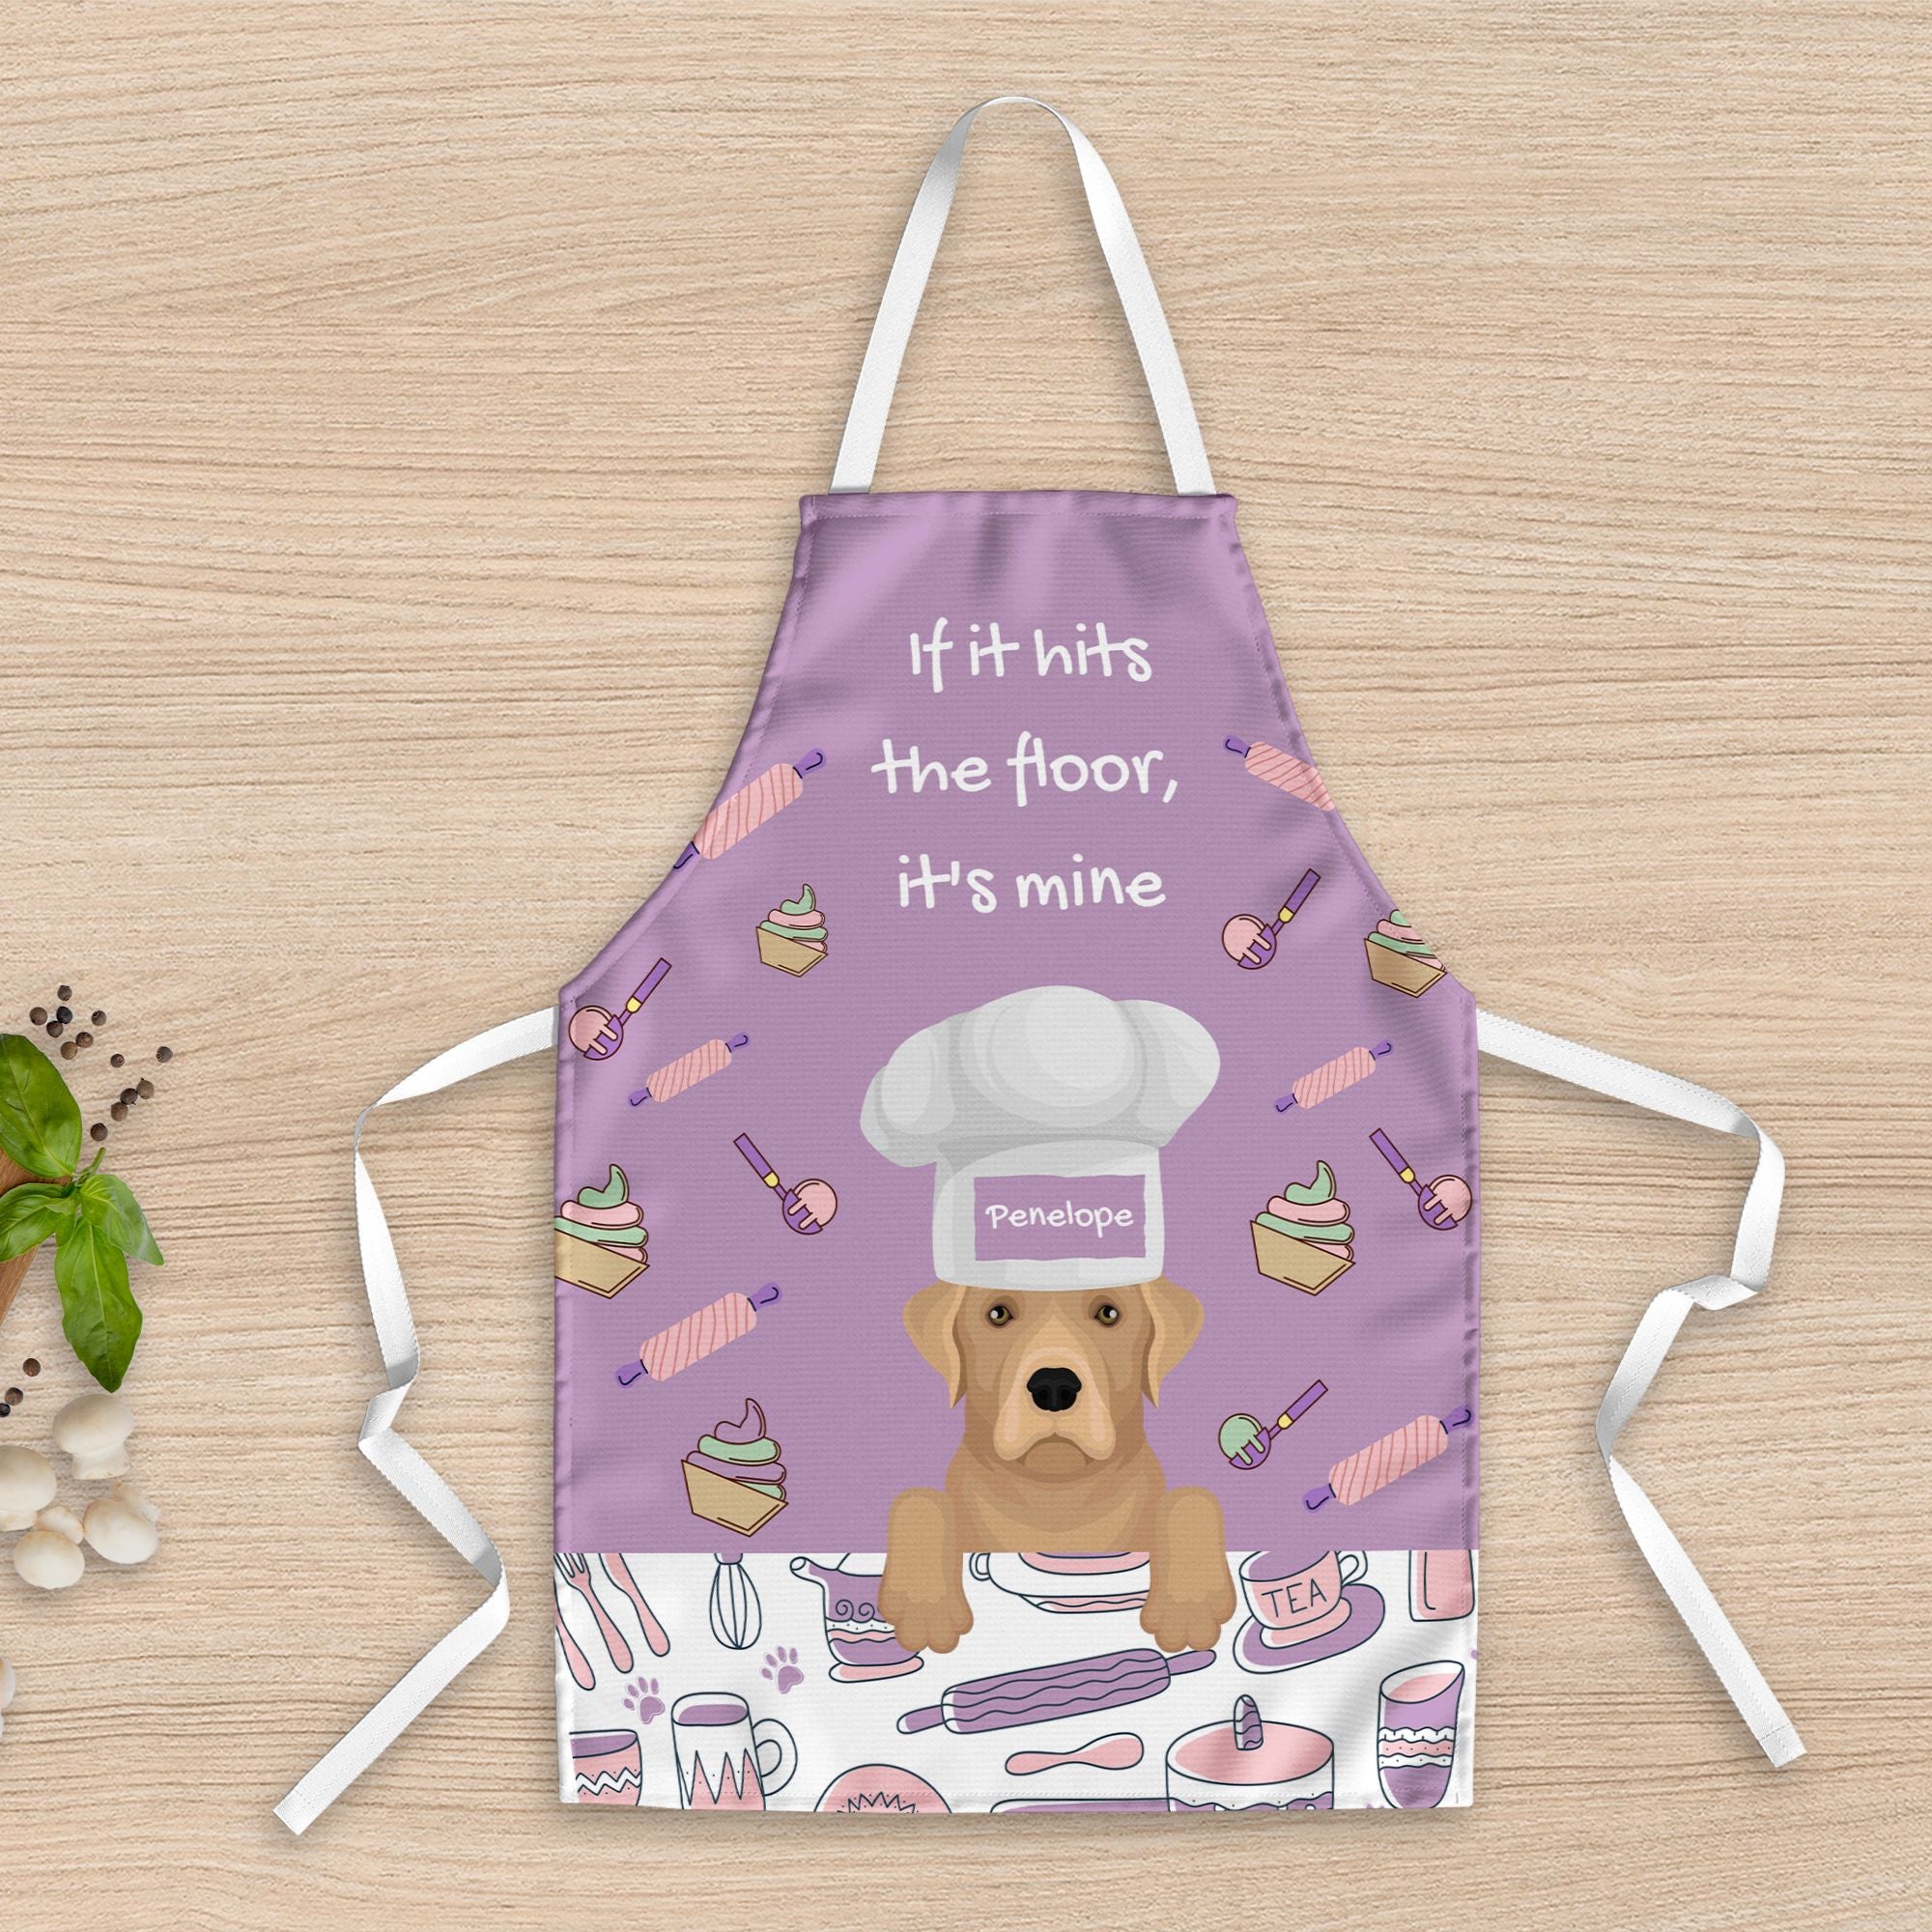 https://cdn.shopify.com/s/files/1/0250/7790/7522/products/personalised-dog-name-apron-funny-gift-800398.jpg?v=1691860635